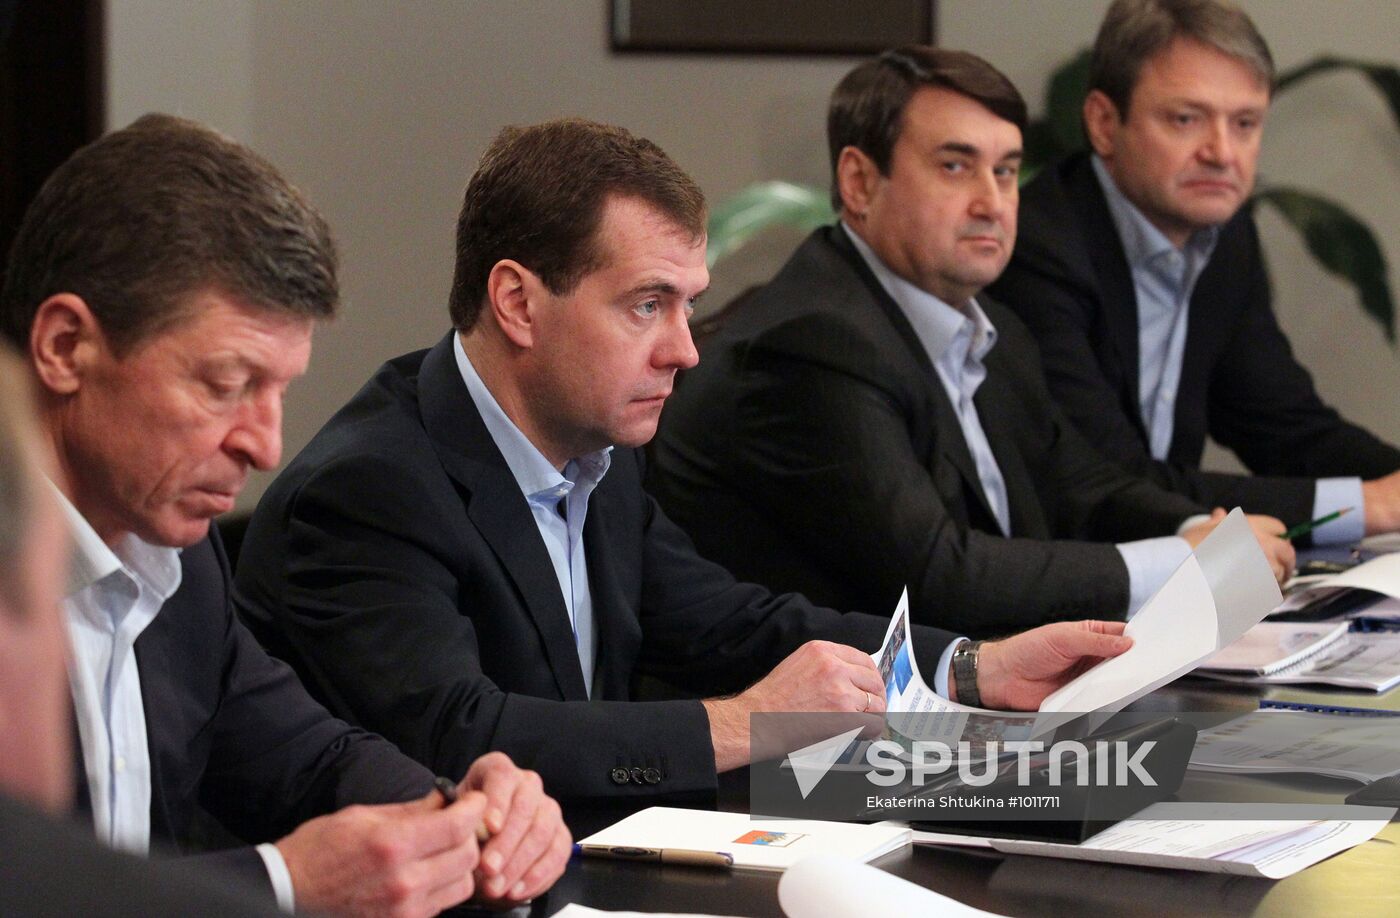 Meeting on construction of facilities for 2014 Sochi Olympic